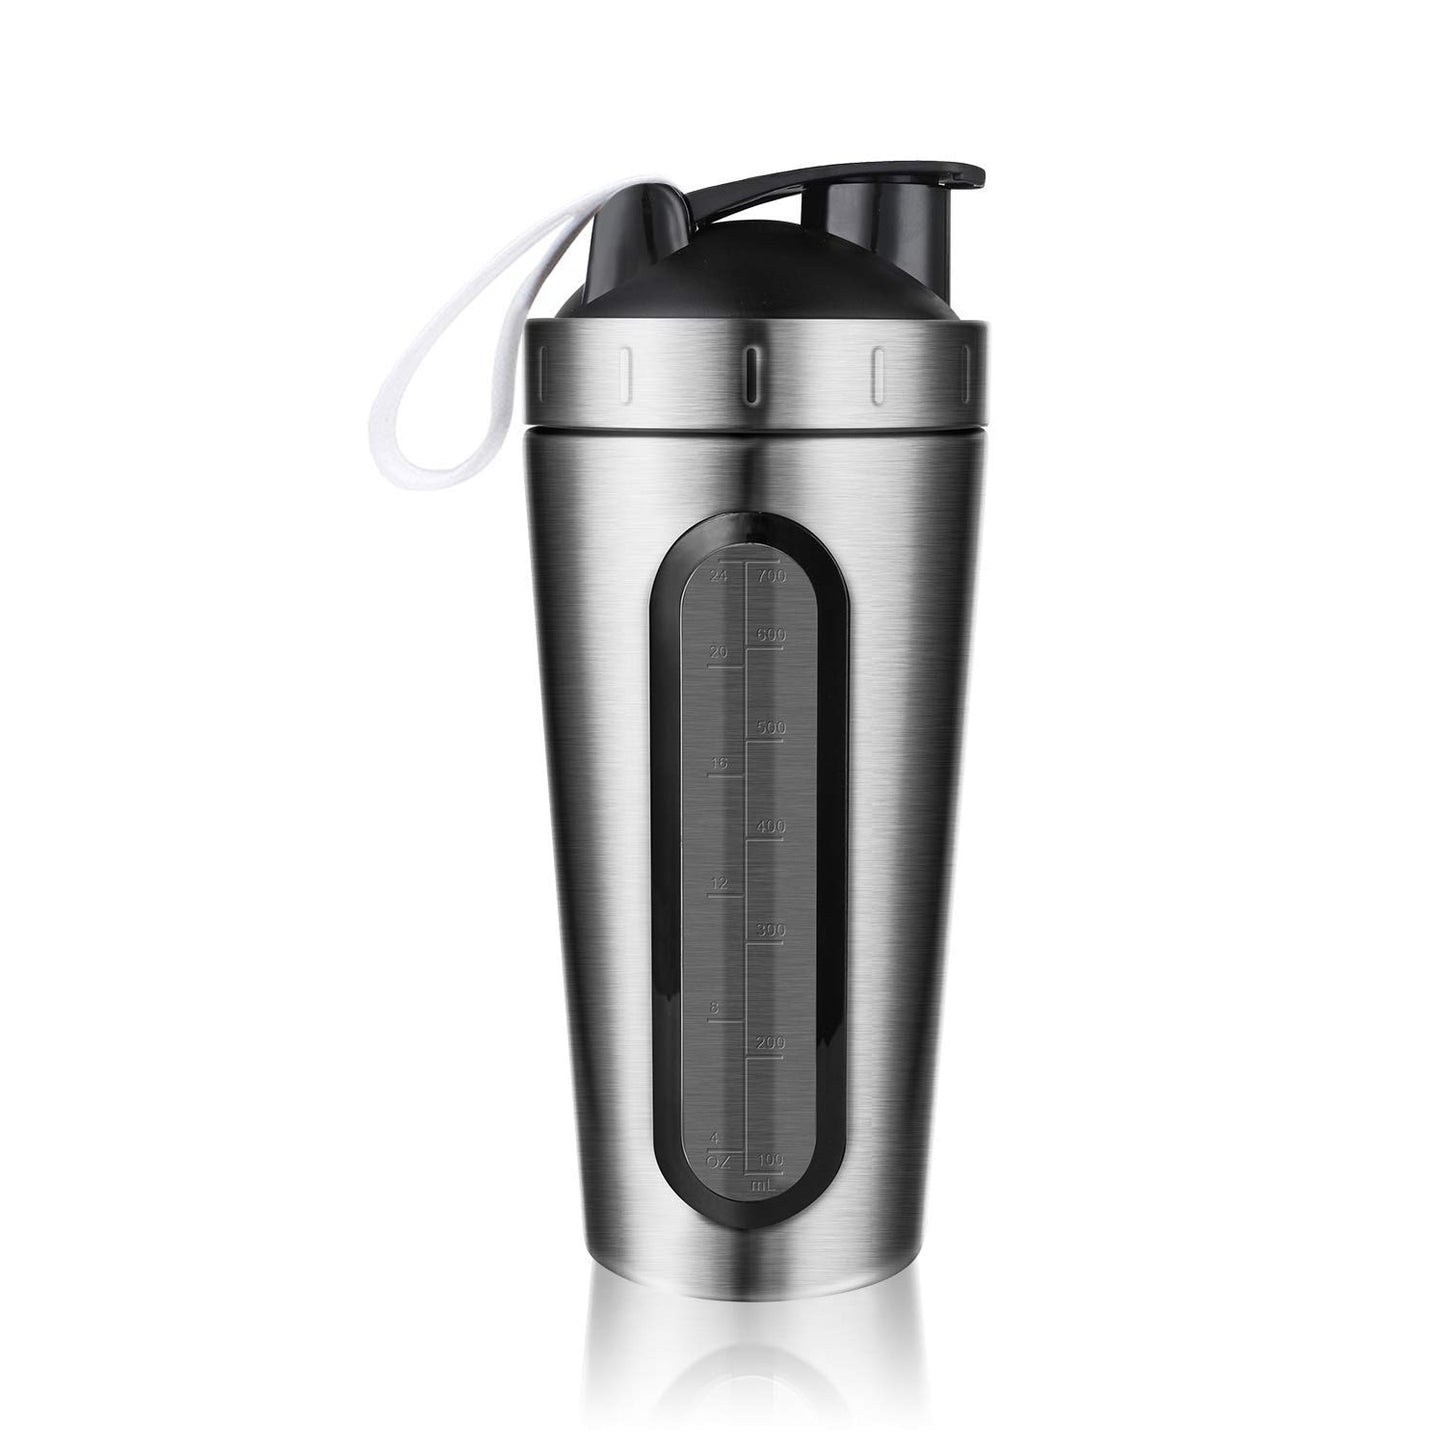 Stainless Steel Protein Shaker - 5 COLOURS